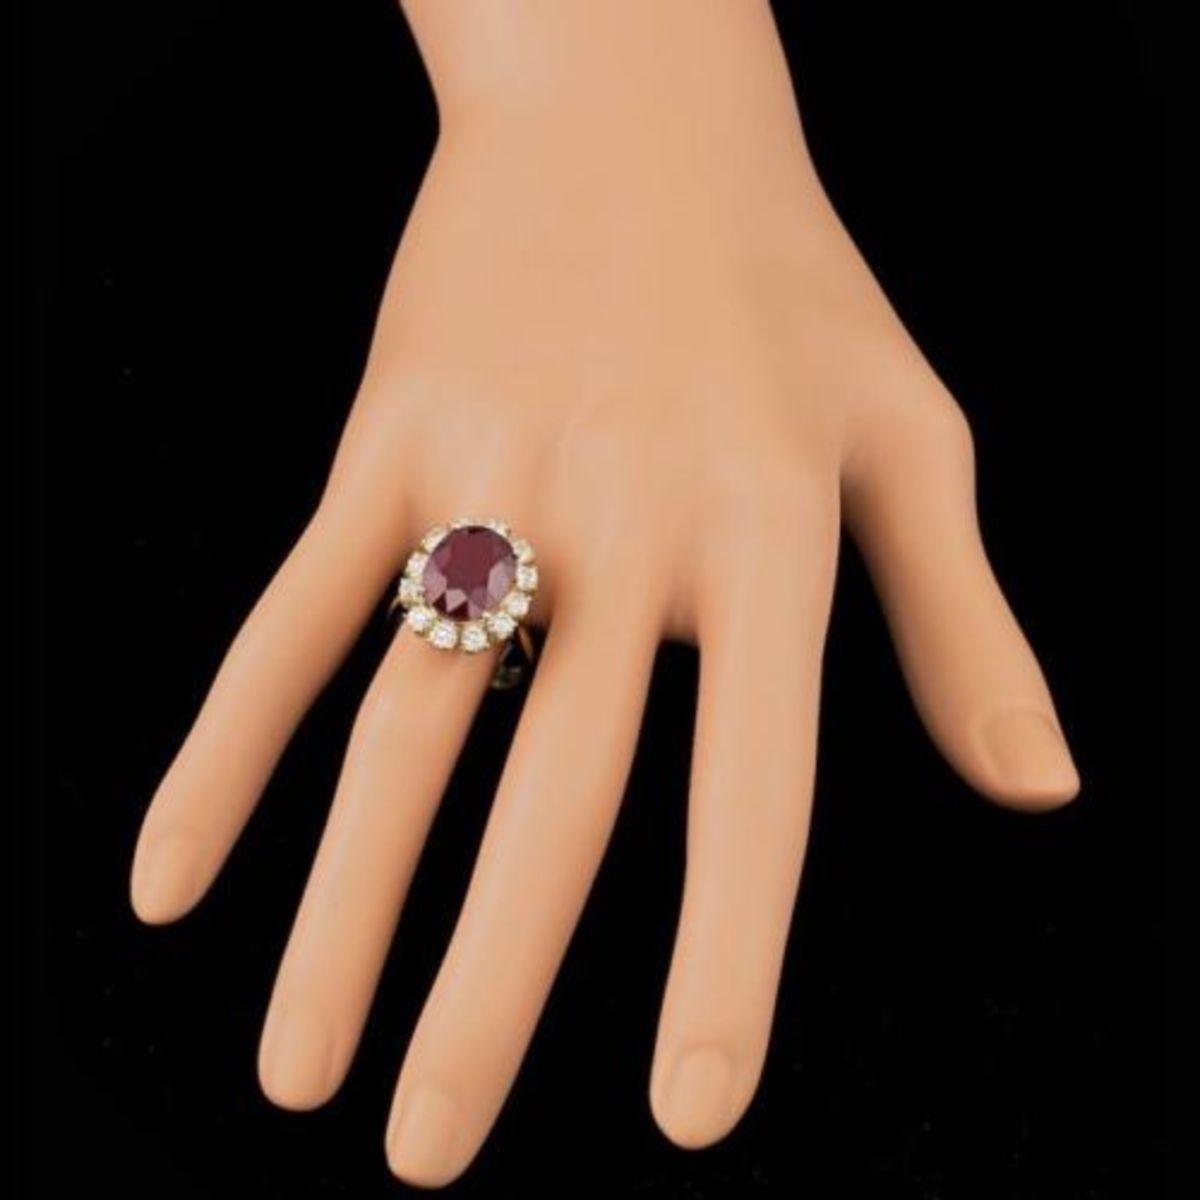 14K Yellow Gold 8.72ct Ruby and 1.68ct Diamond Ring